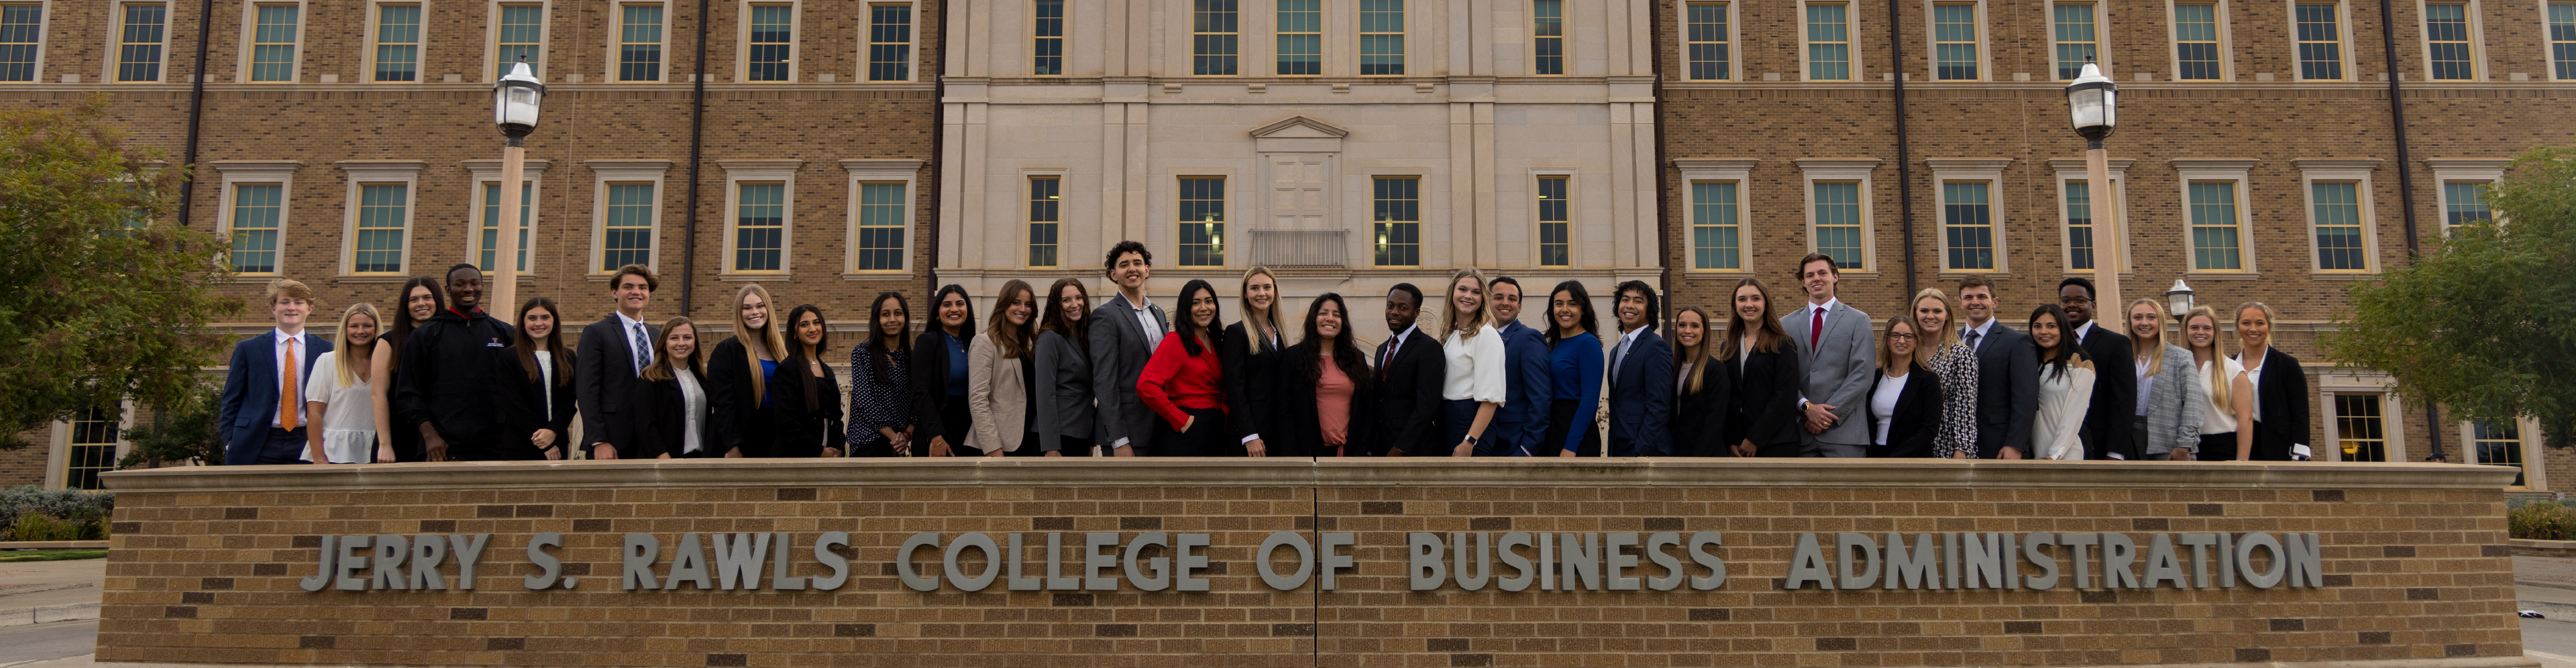 Photo of ambassadors in front of Rawls College building